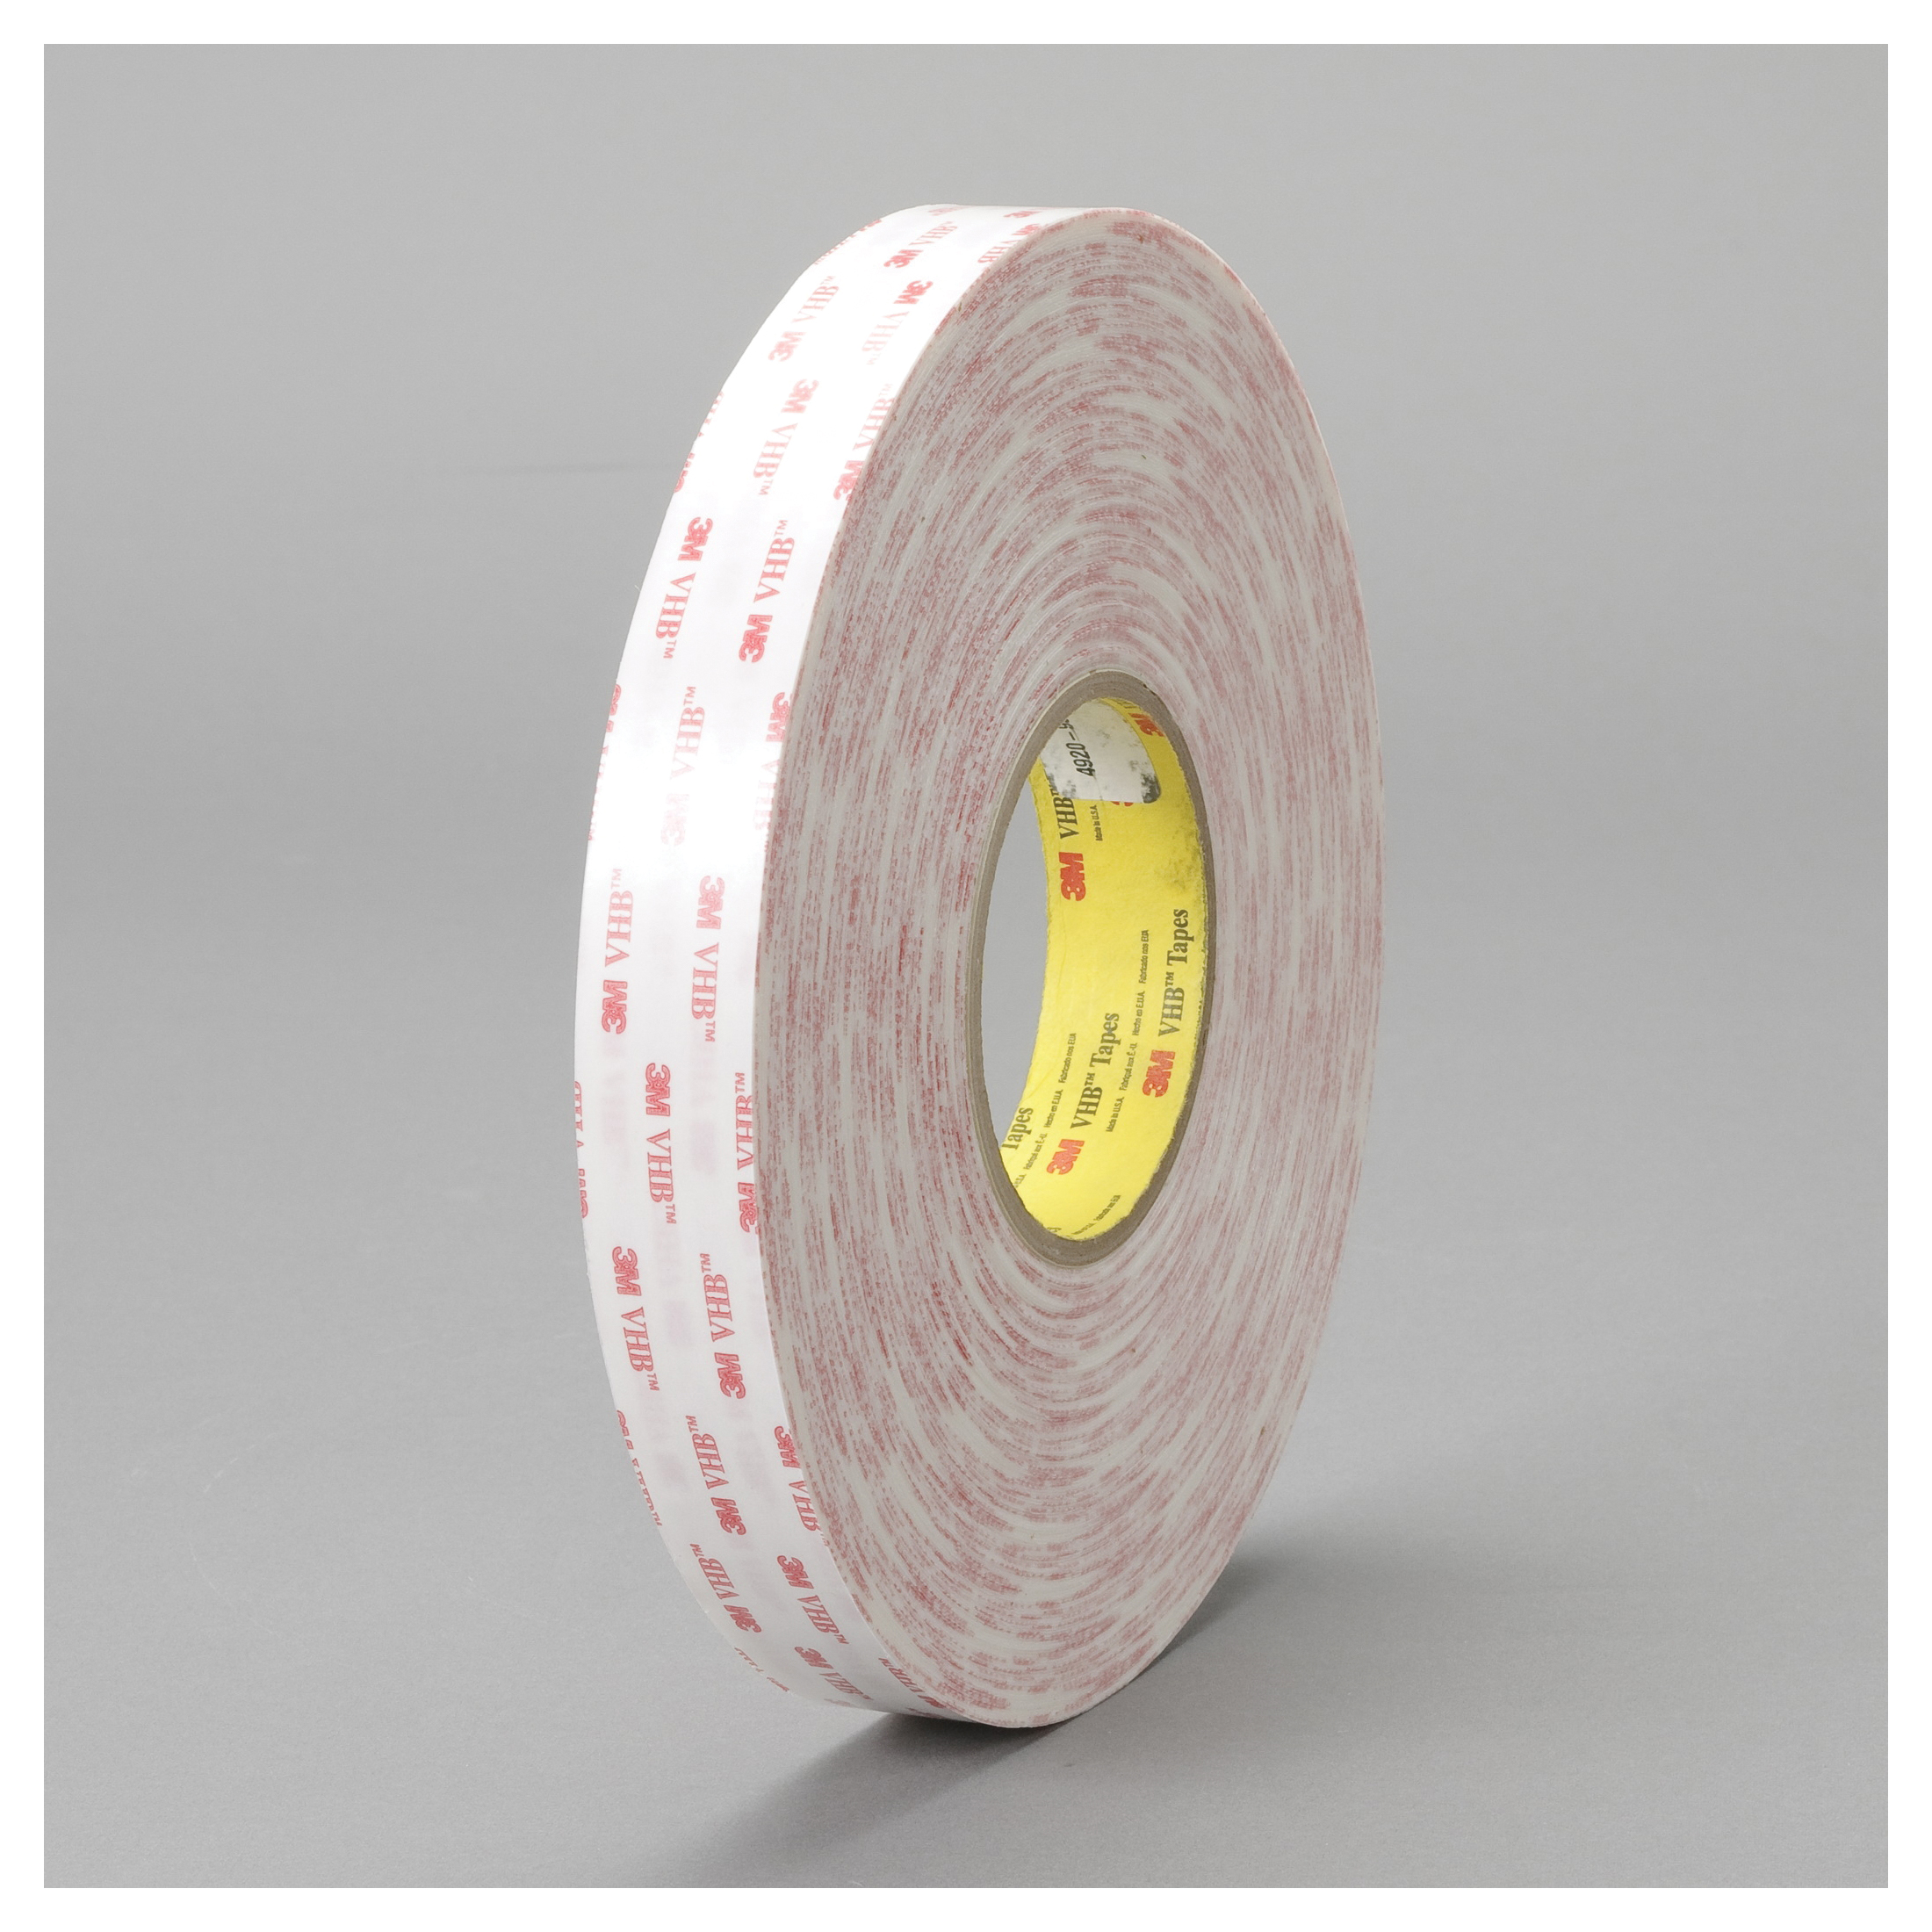 3M™ VHB™ 021200-64595 Pressure Sensitive Double Sided Bonding Tape, 72 yd L x 1 in W, 0.015 in THK, General Purpose Acrylic Adhesive, Acrylic Foam Backing, White